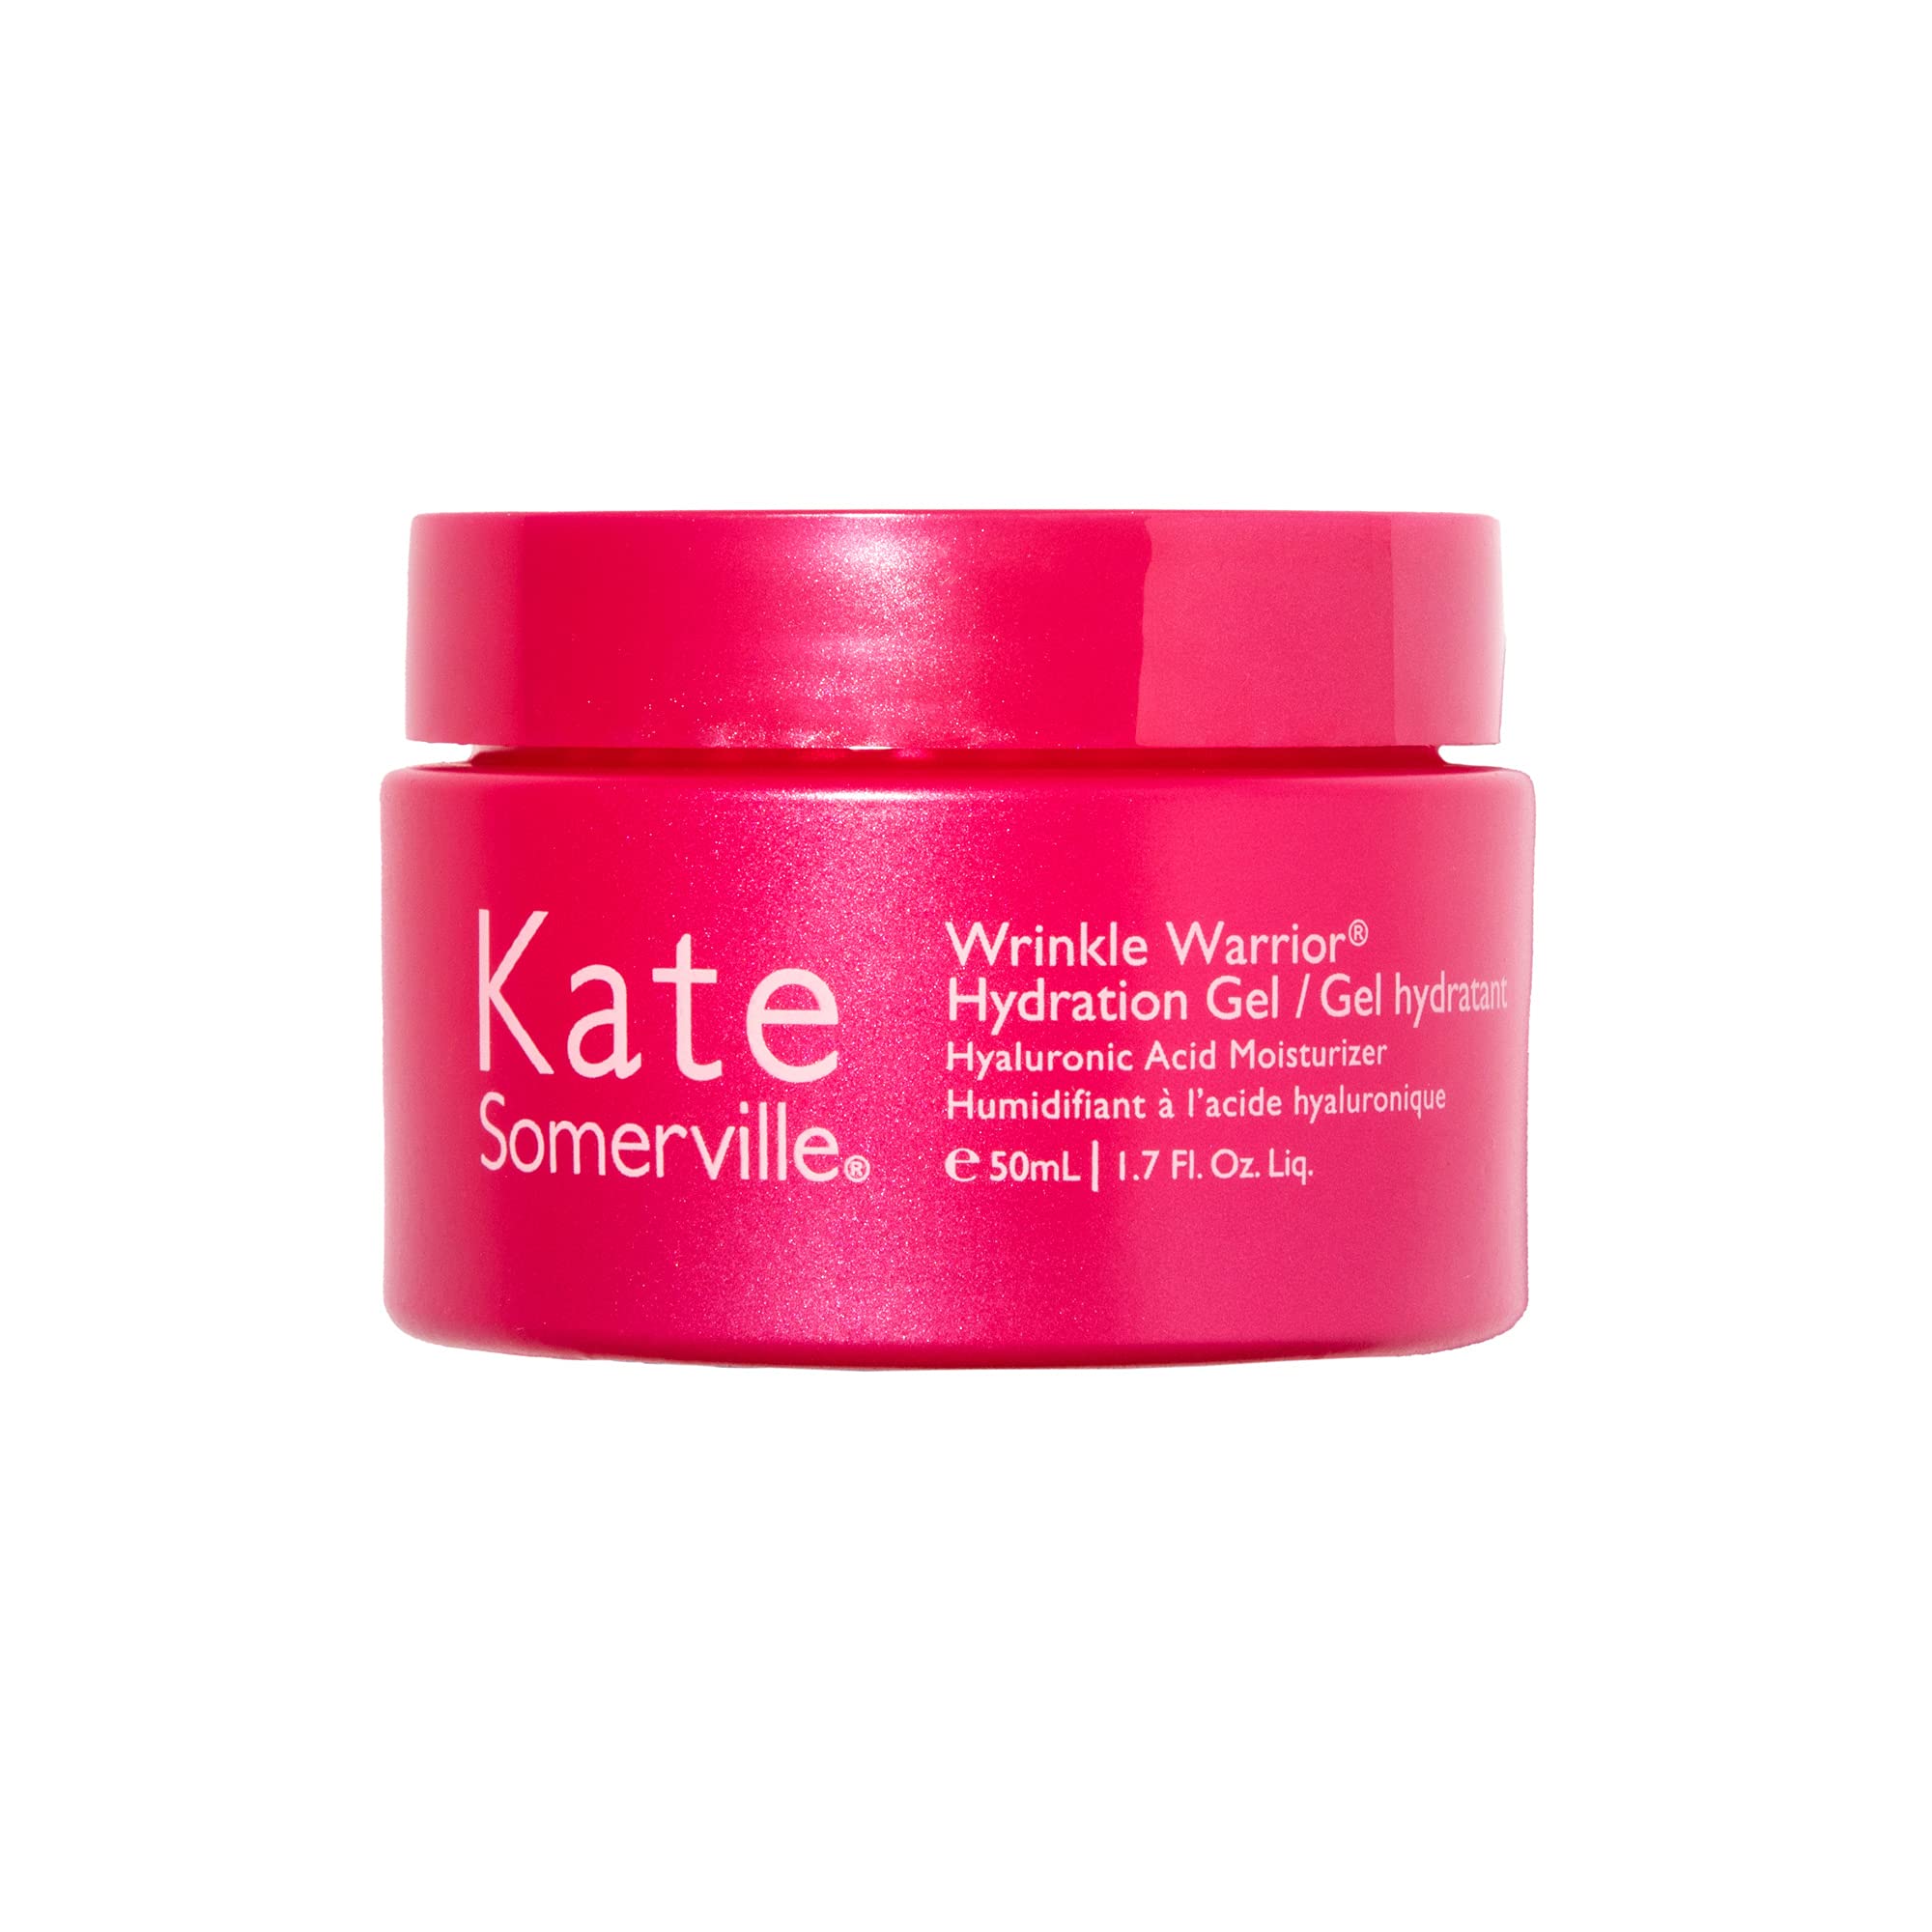 Kate Somerville Wrinkle Warrior Hydration Gel – Clinically Formulated Hyaluronic Acid Facial Moisturizer – Lightweight Anti-Aging Face Cream, 1.7 F...